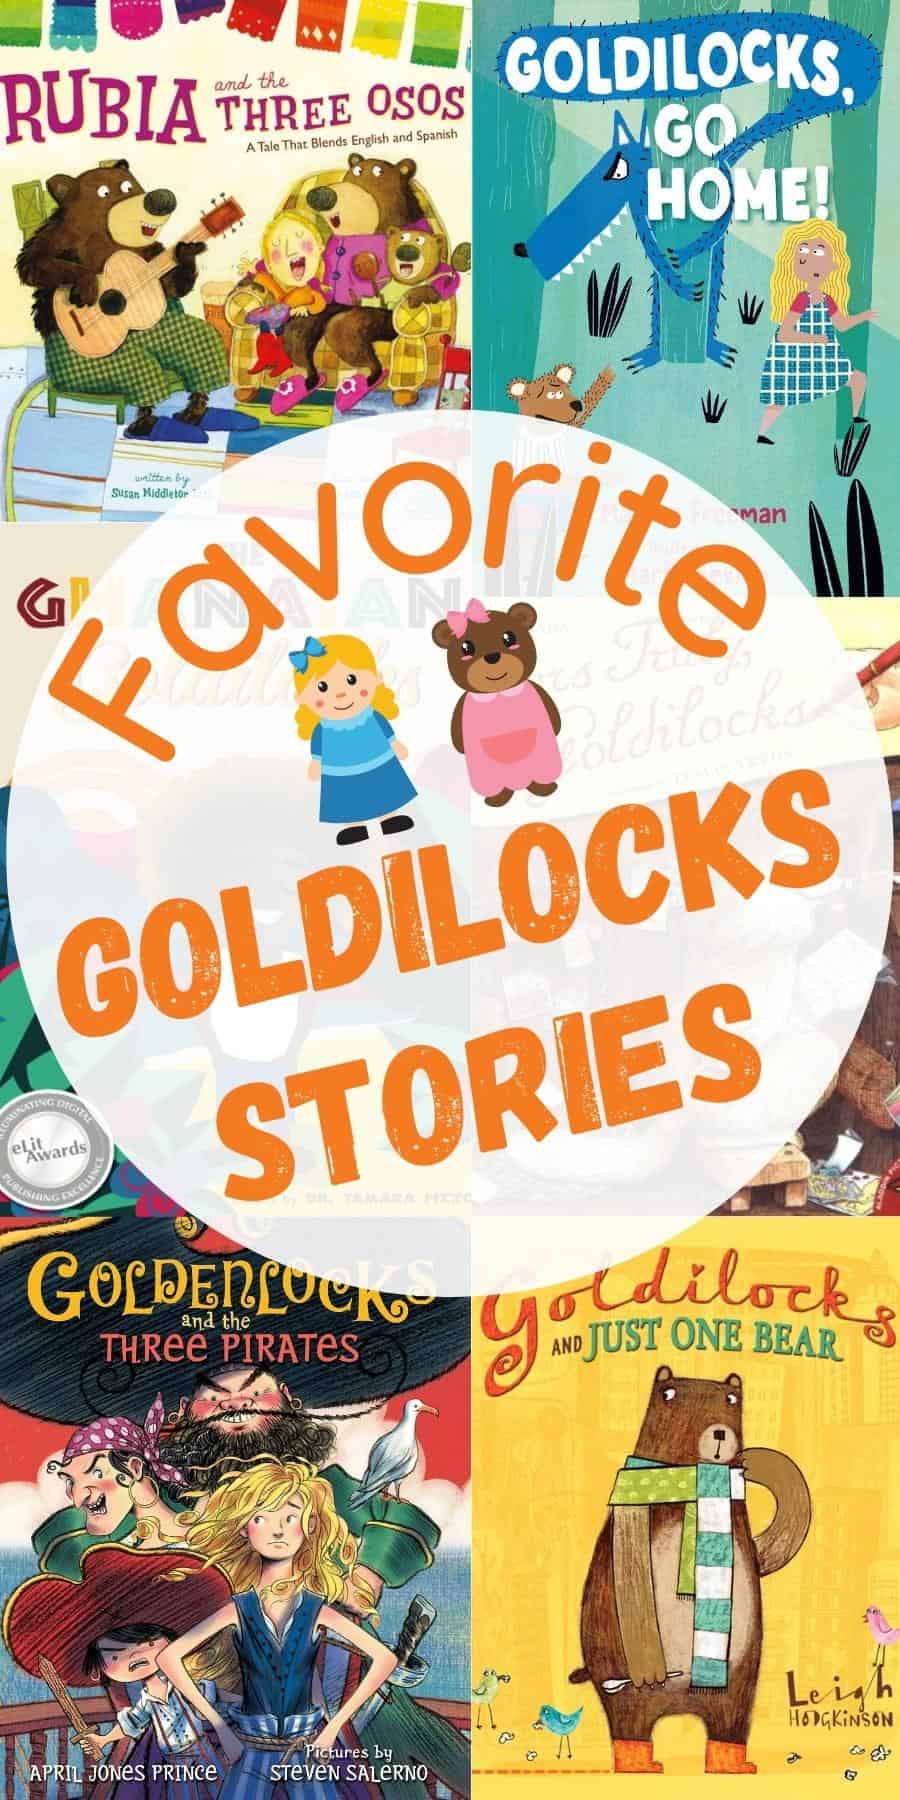 Goldilocks and the Three Bears is a great fairy tale to read when you're introducing children to fairy tales. Start by reading Goldilocks since it is so easy to tell and retell, and it is an engaging story even if it’s its shortest or most basic form.